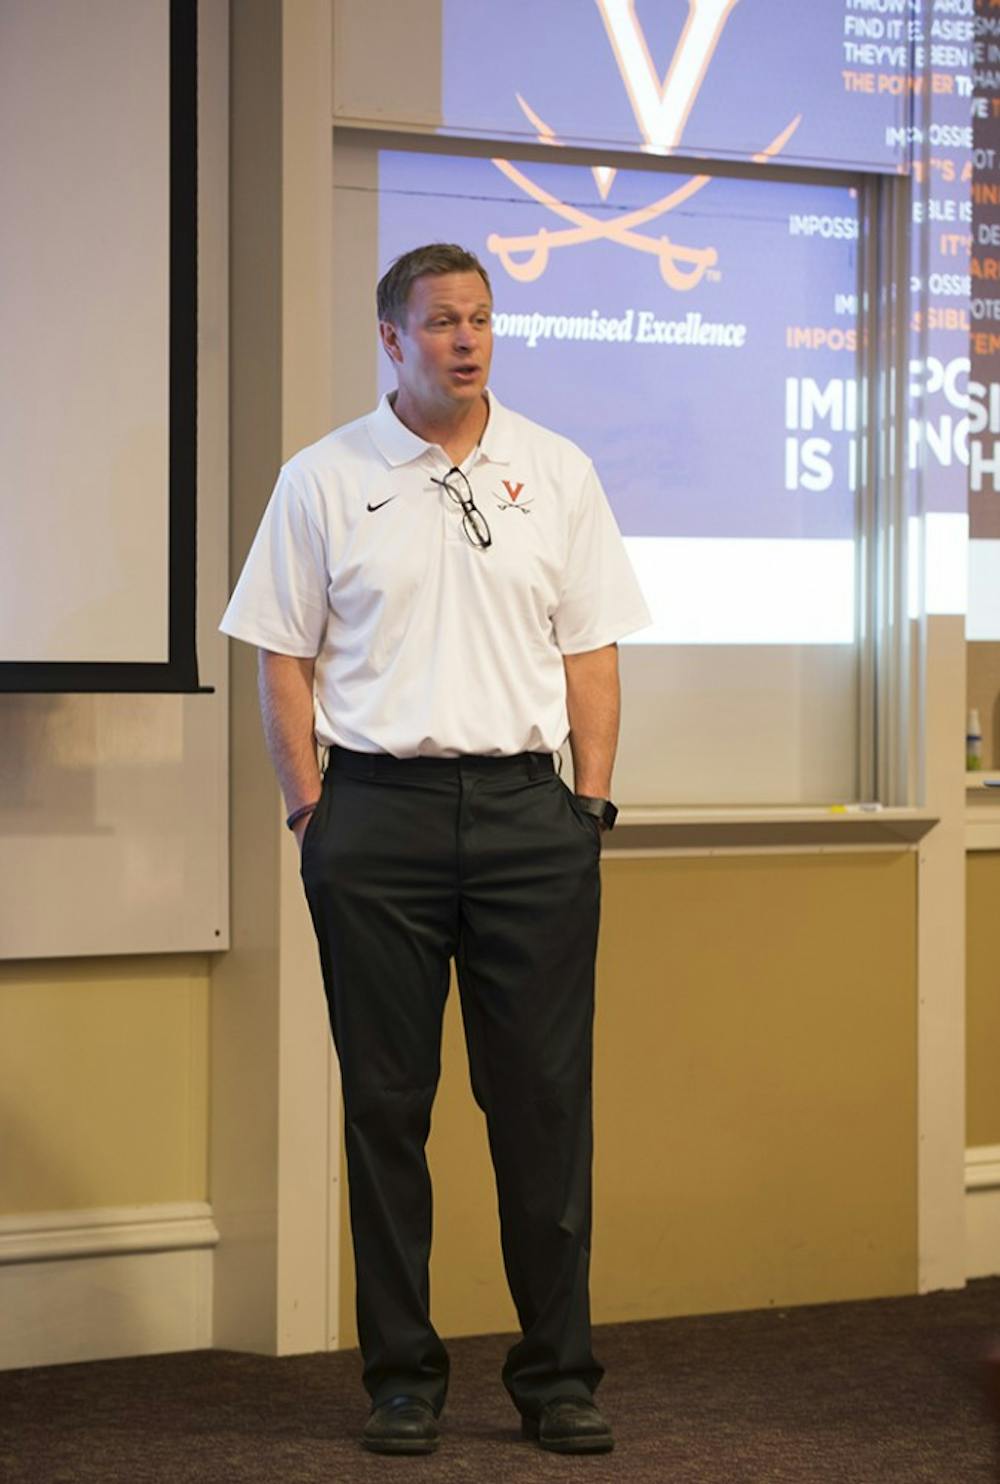 <p>Mendenhall spoke at the event about how strategic thinking has influenced his coaching.</p>